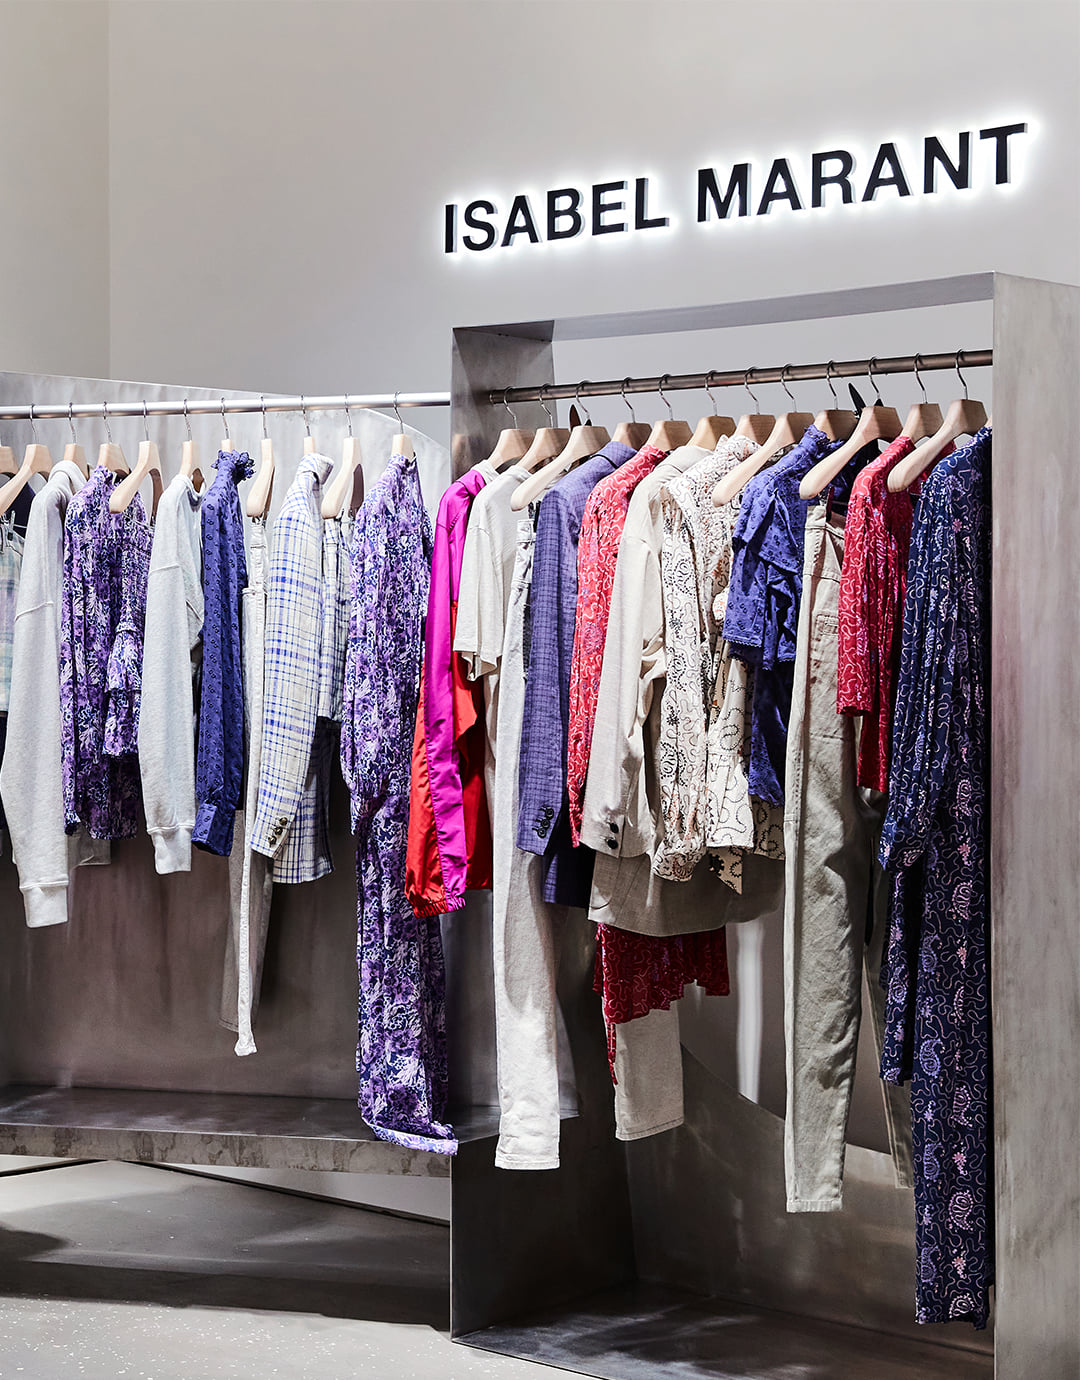 CPP-LUXURY.COM on Twitter: "Isabel Marant opens new store in Seoul at The Hyundai Department store #IsabelMarant #Seoul #HyundaiDepartmentStore #newopening #luxury #luxuryfashion https://t.co/j0S29zxvoA" / Twitter